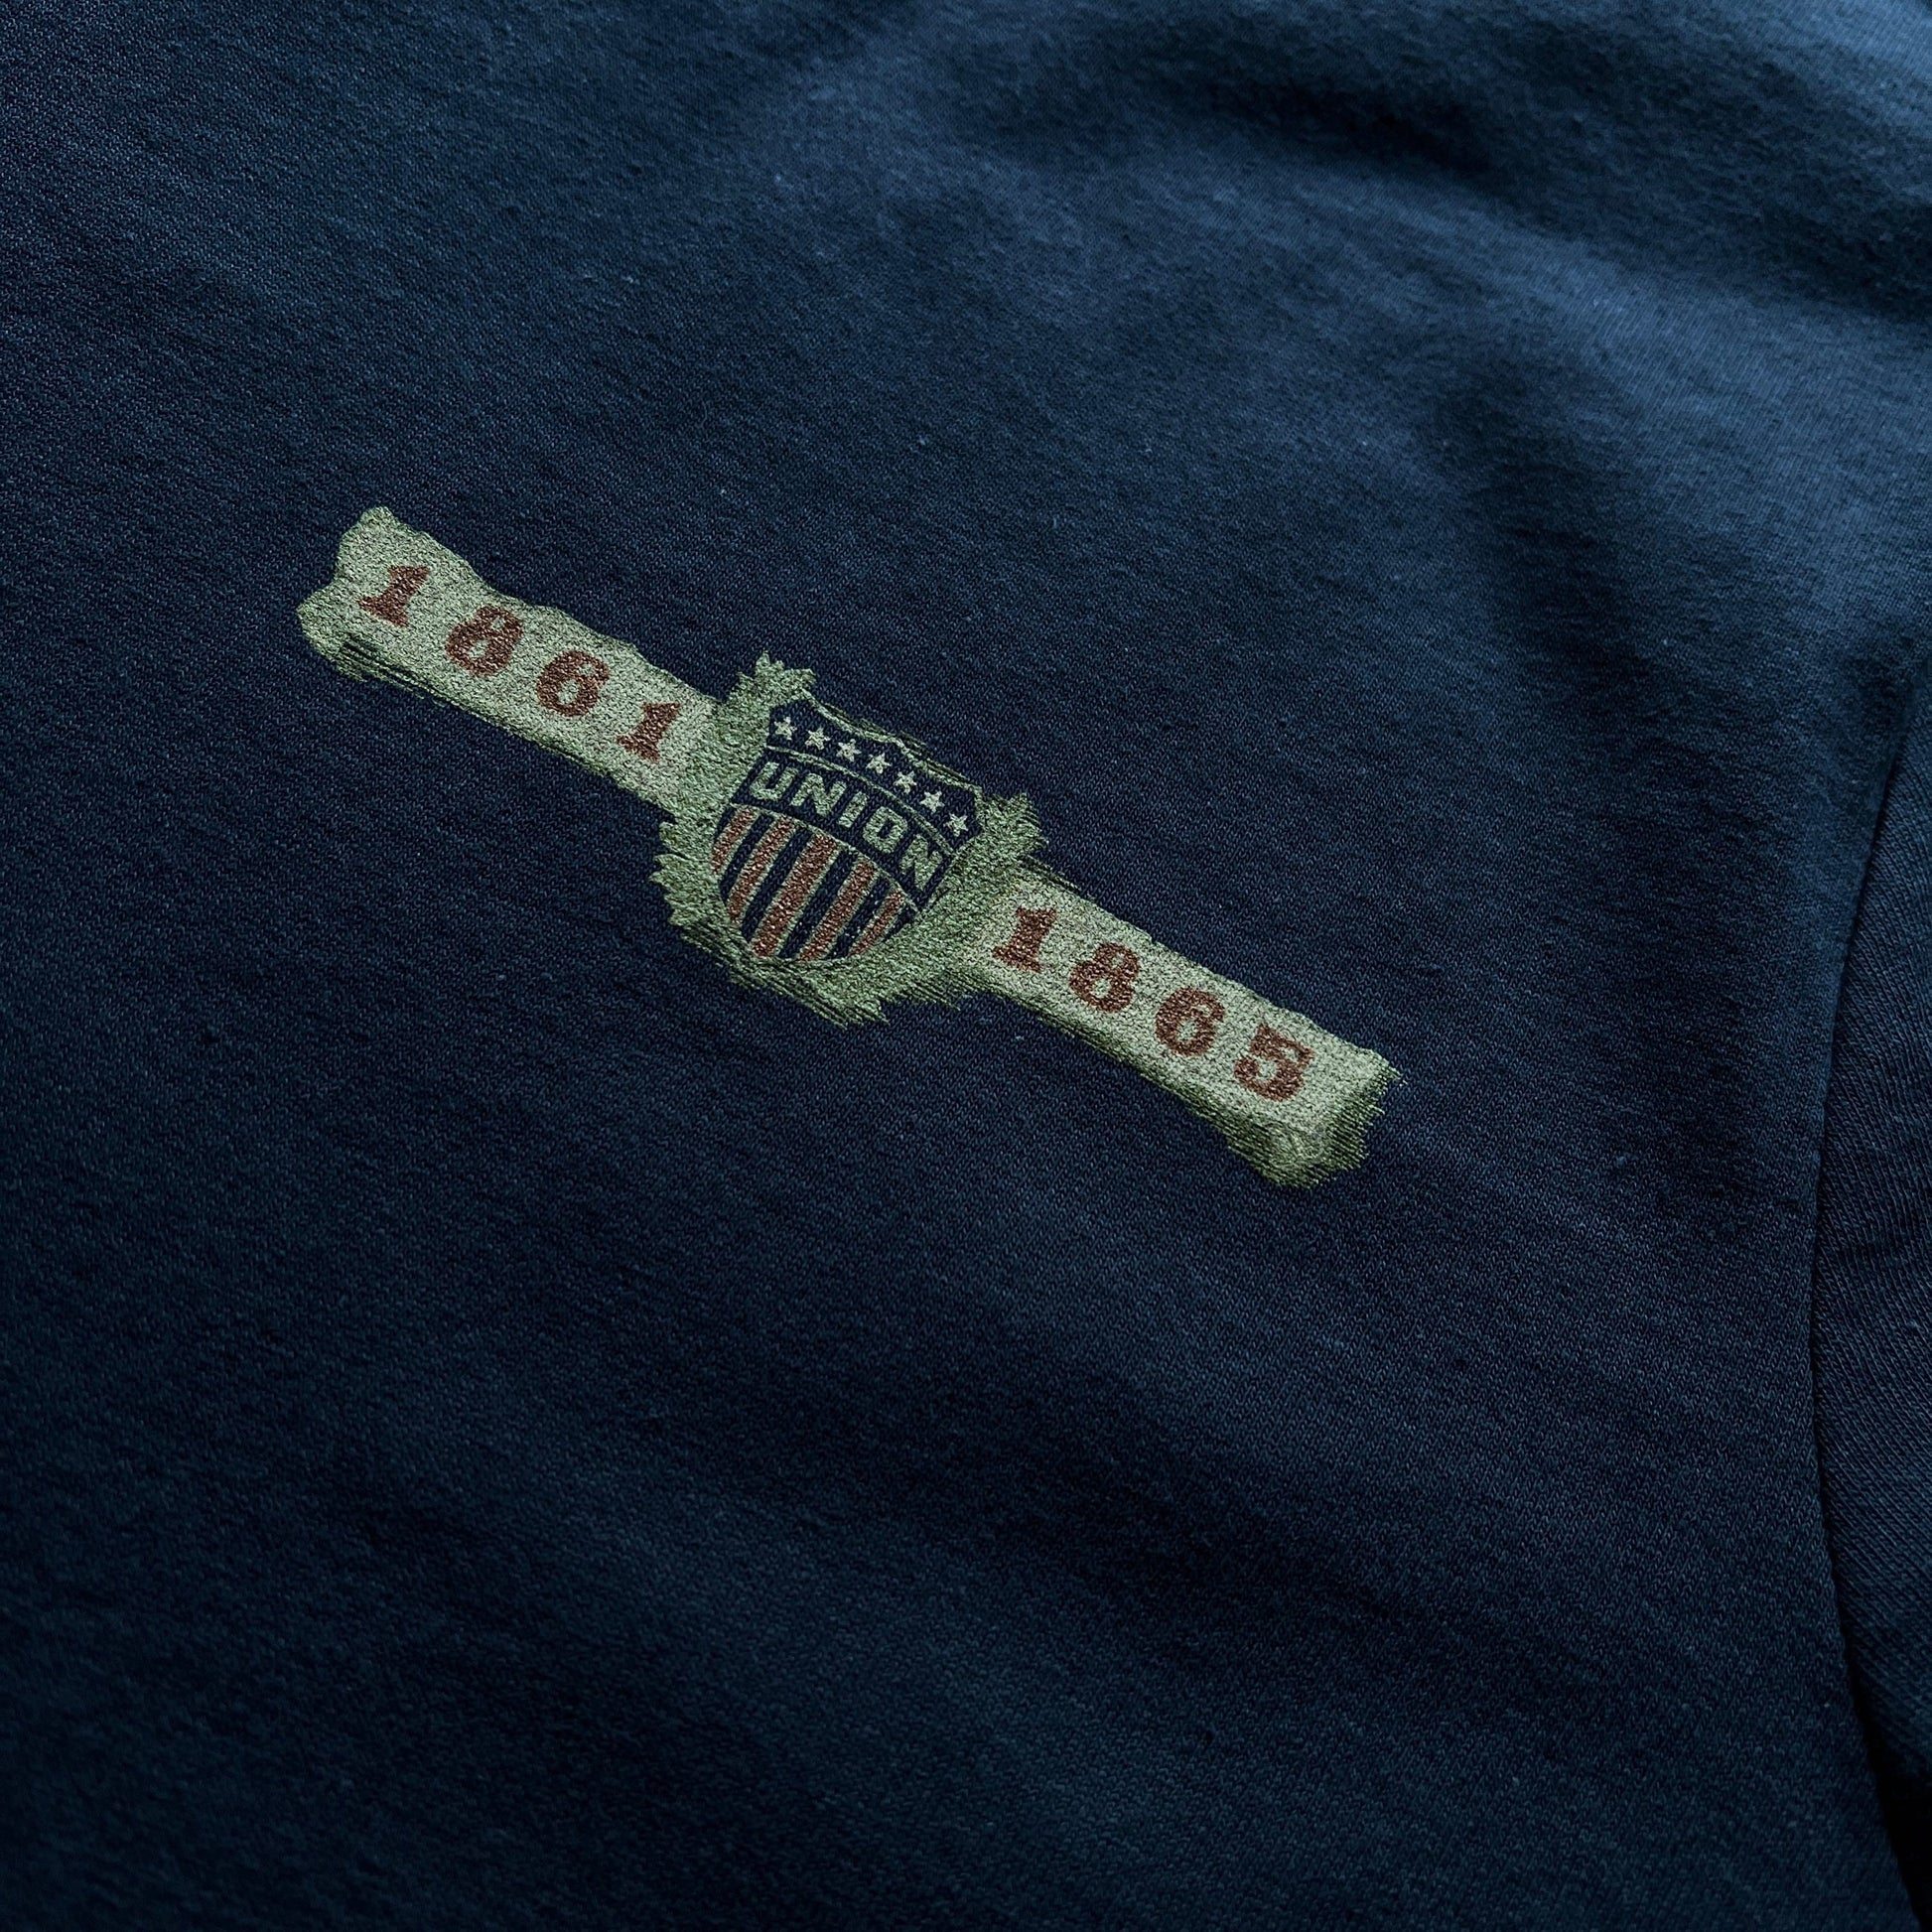 Front close-up of "The Army of the Potomac" Crewneck sweatshirt from The History List store